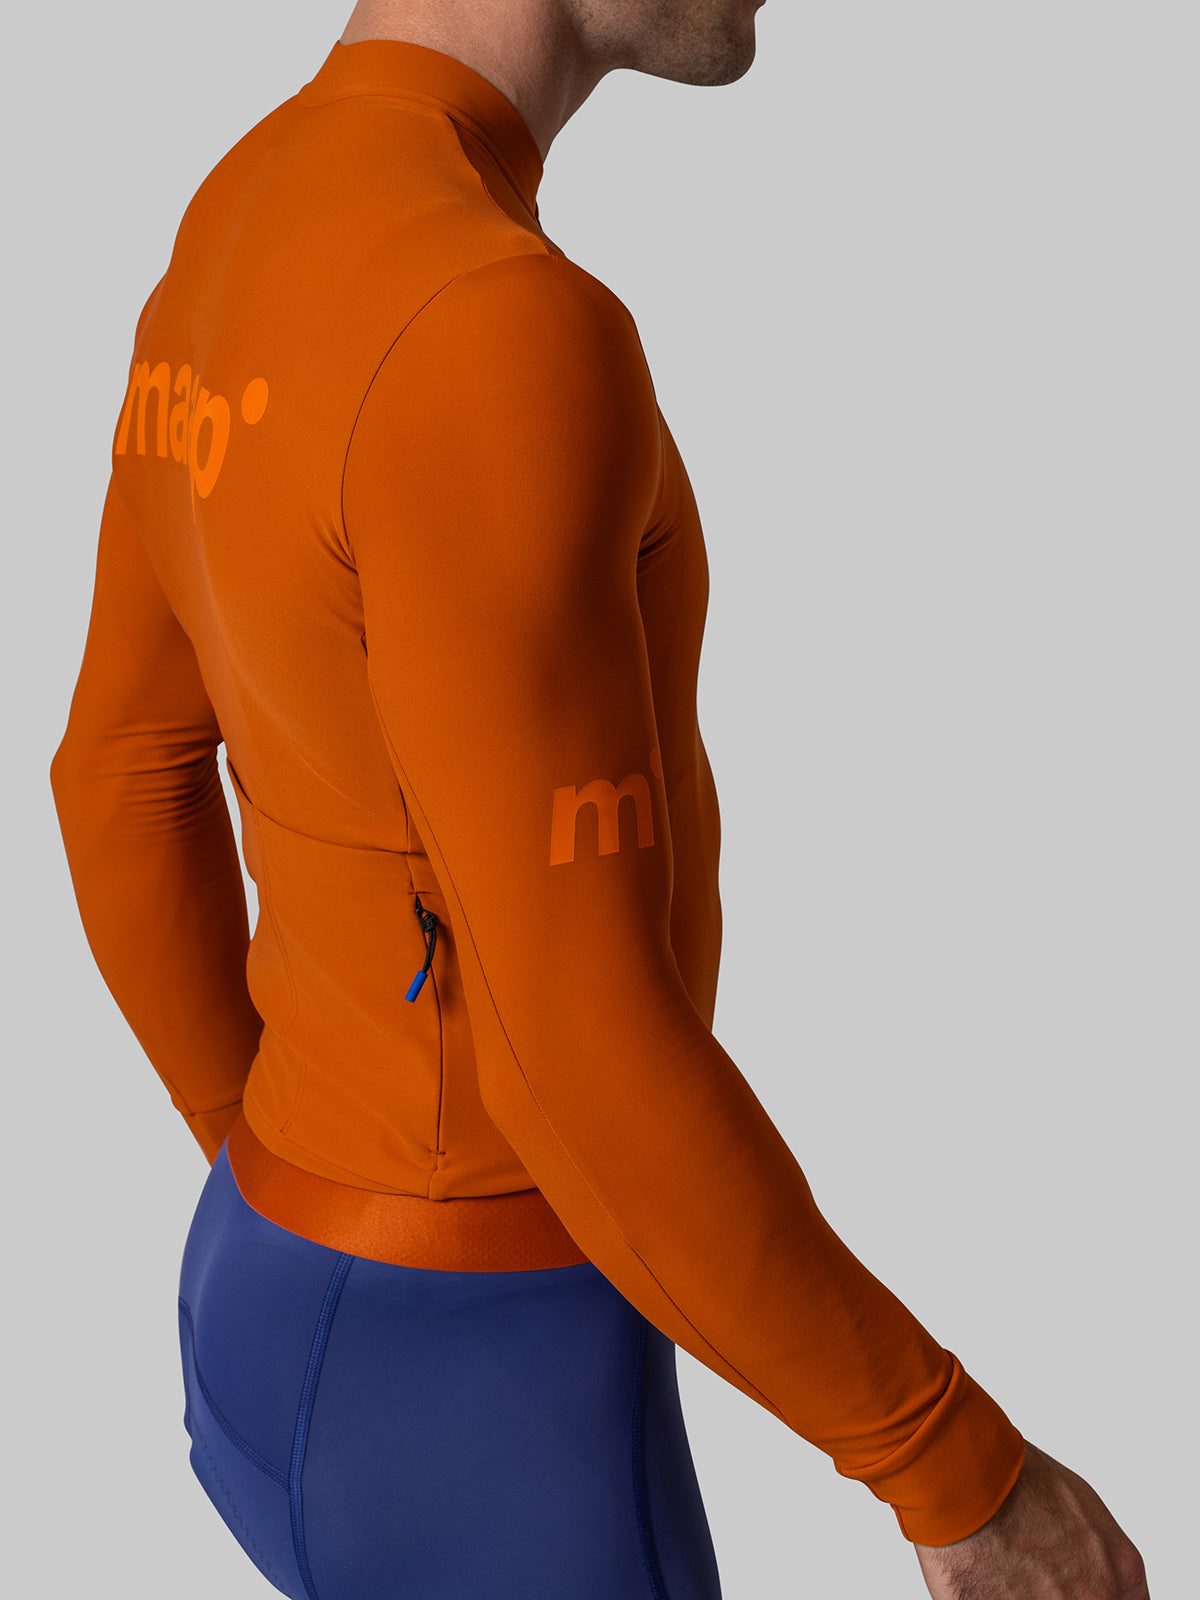 Training Thermal LS Jersey